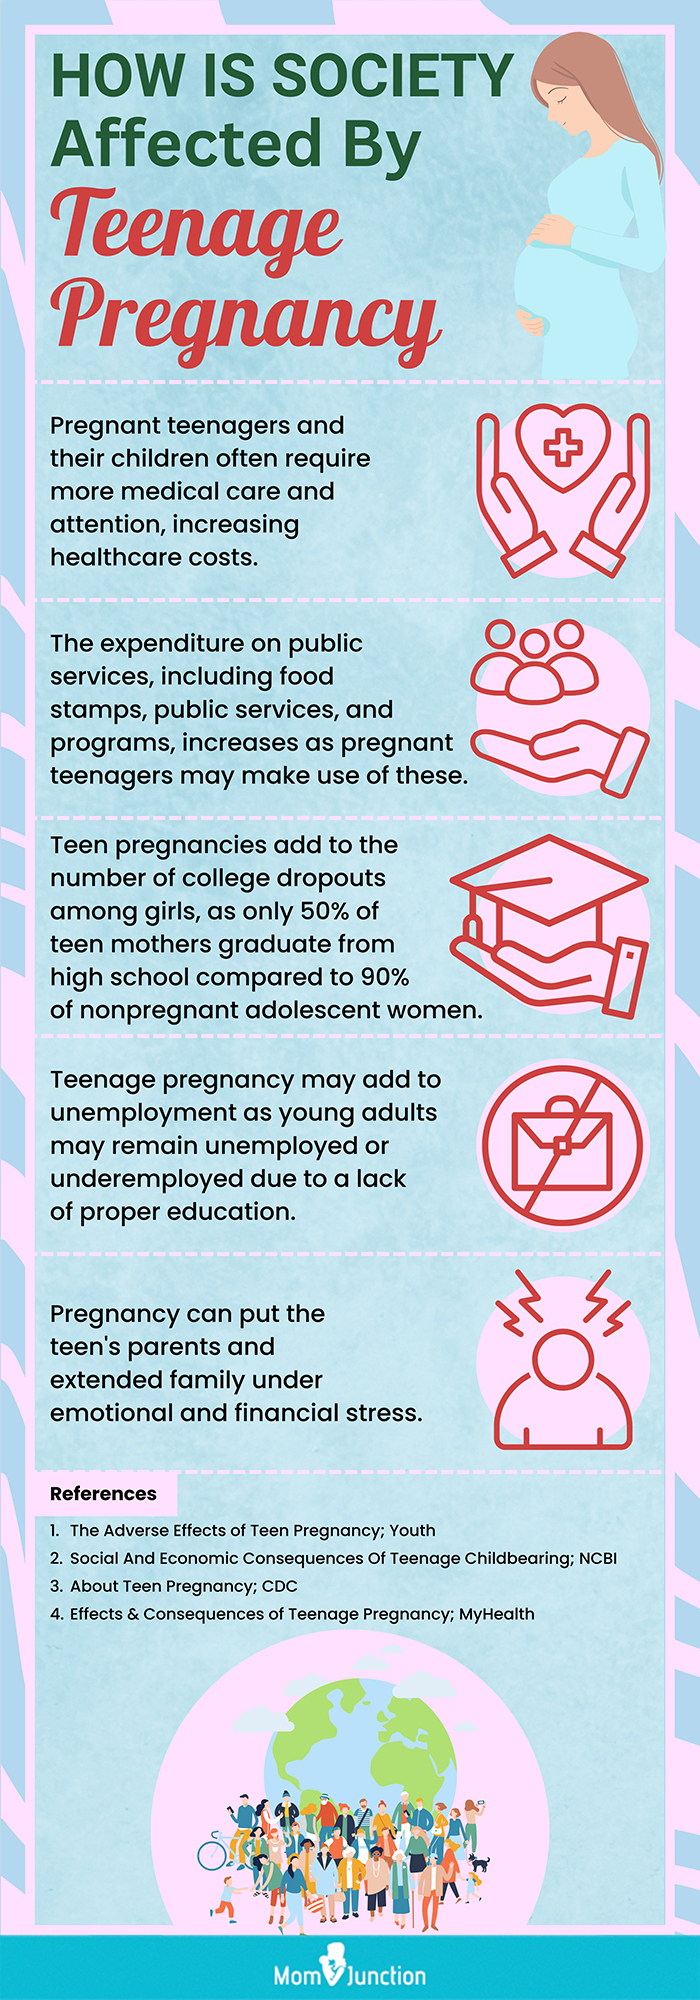 11 Negative Effects Of Teenage Pregnancy On Society Porn Photo